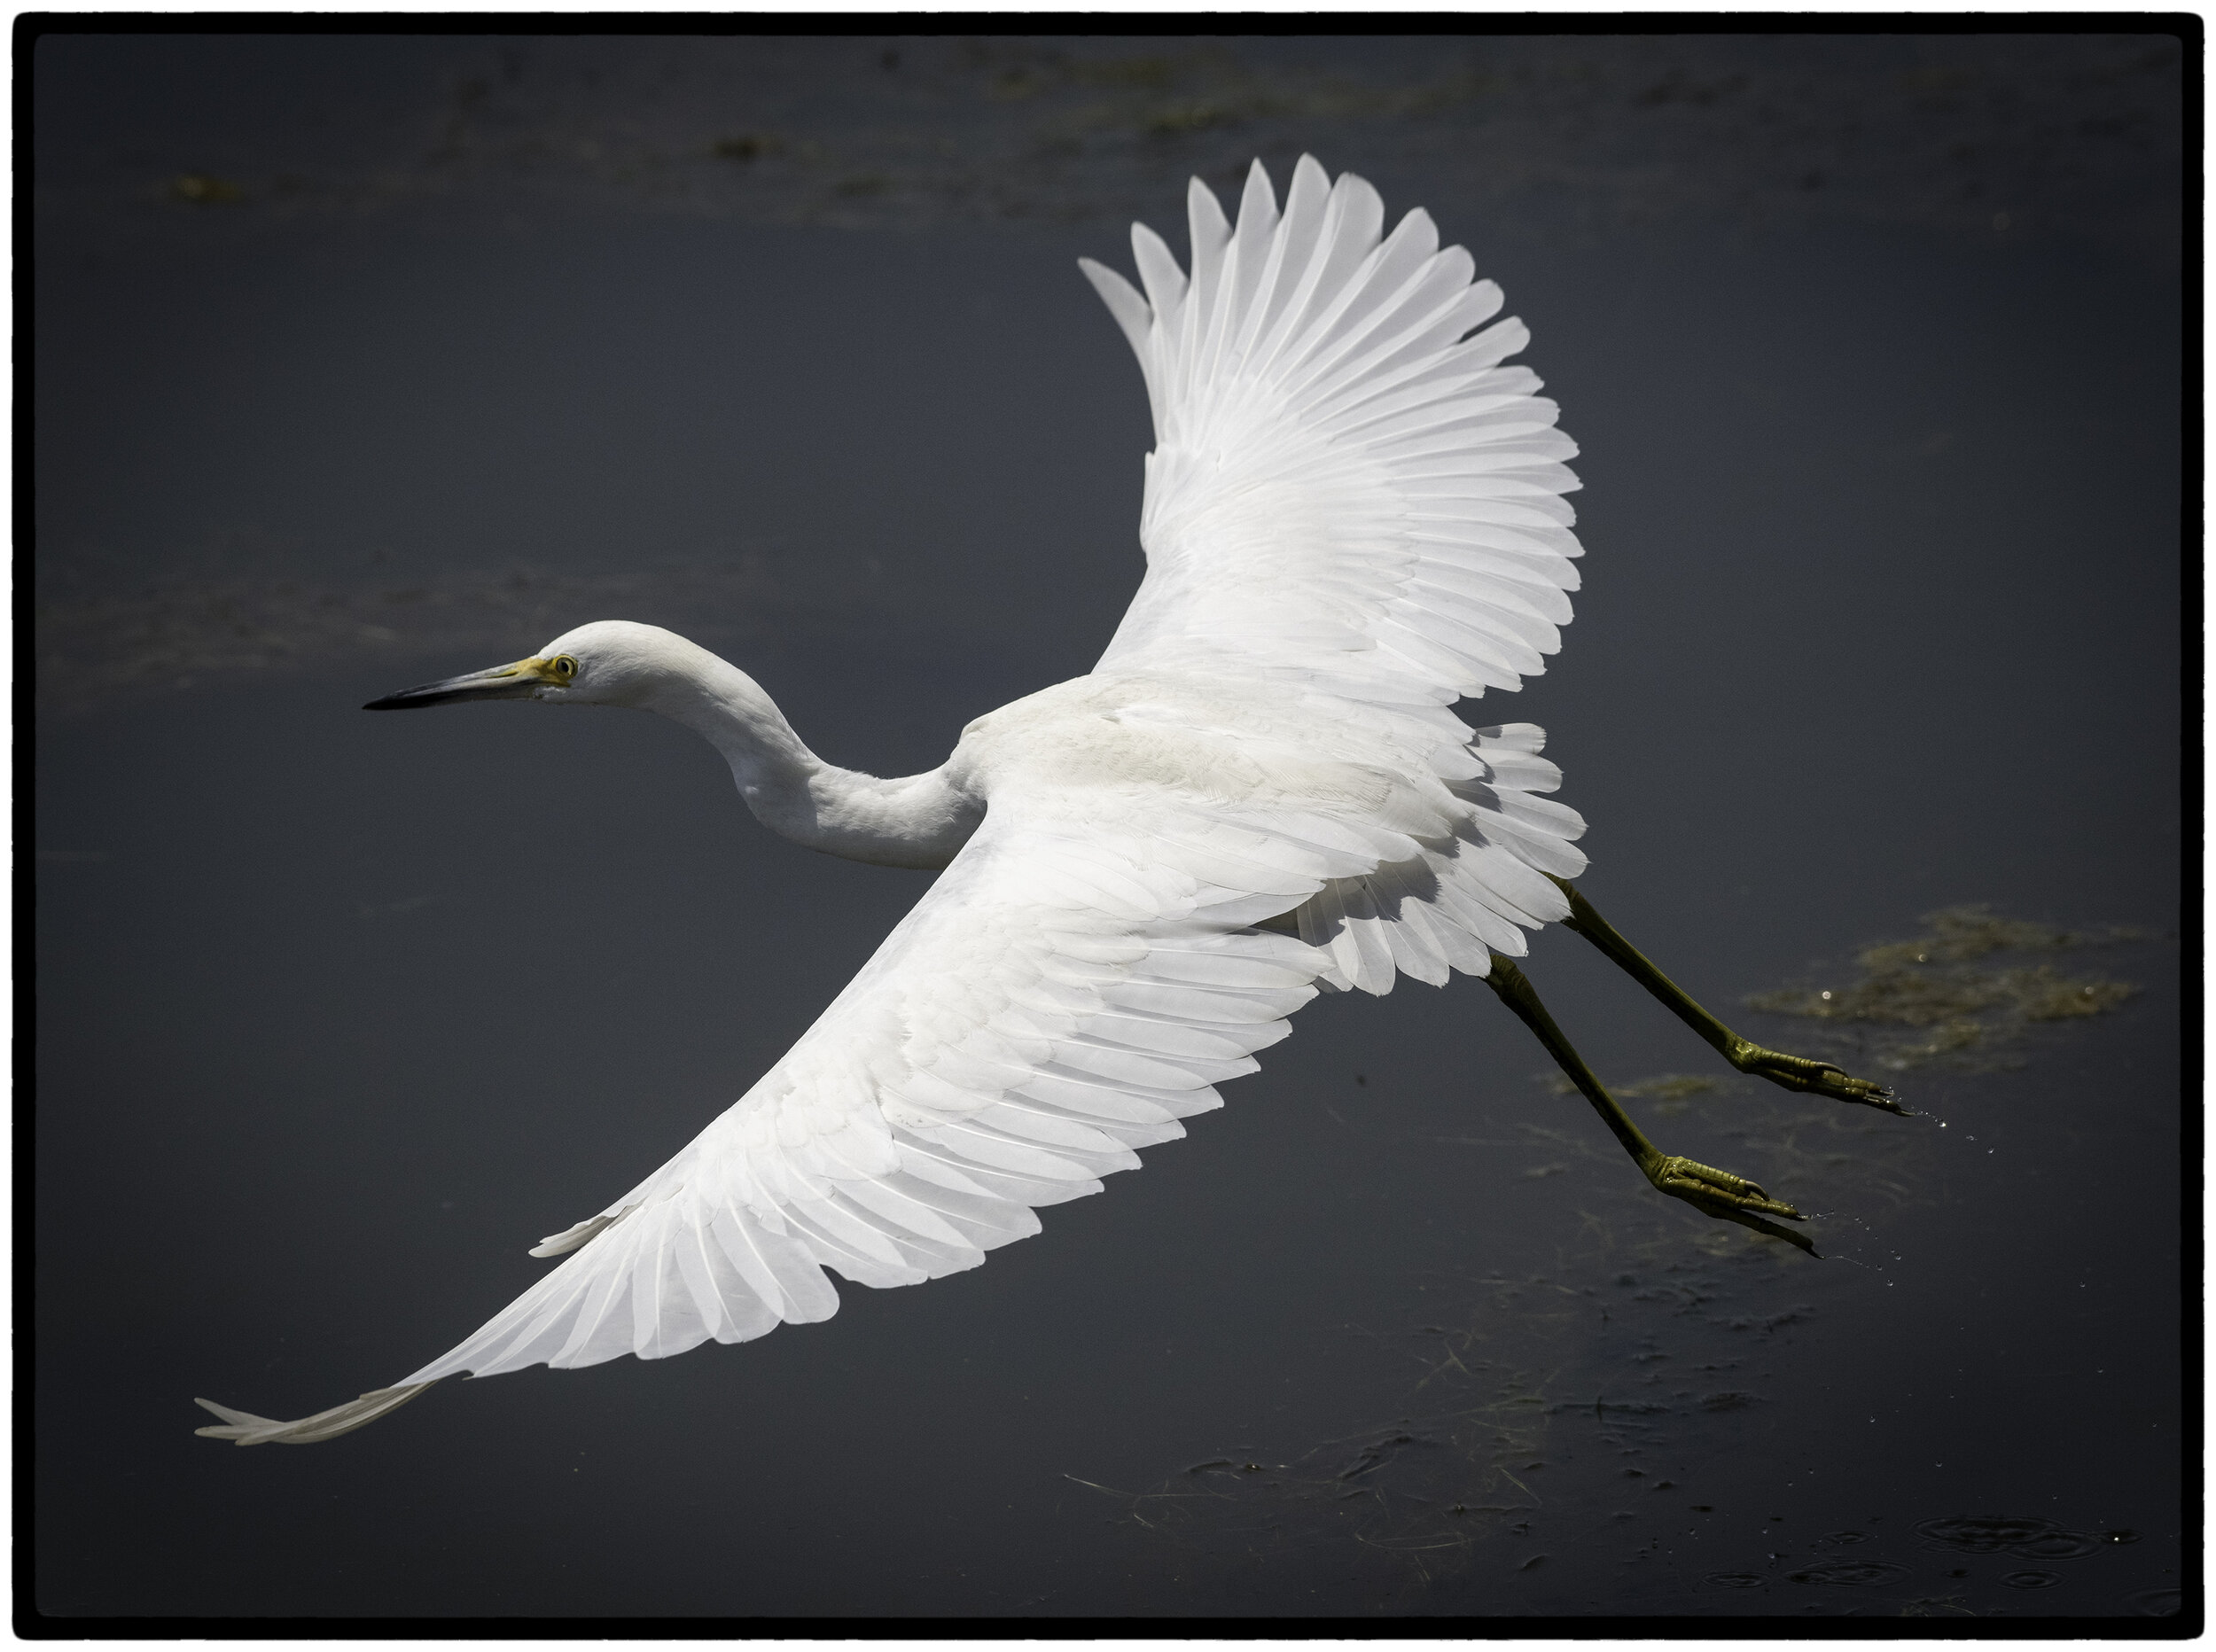  Great Egrets are tall, long-legged wading birds with long, S-curved necks and long, dagger-like bills. In flight, the long neck is tucked in and the legs extend far beyond the tip of the short tail.  Smaller than great blue herons, great egrets have